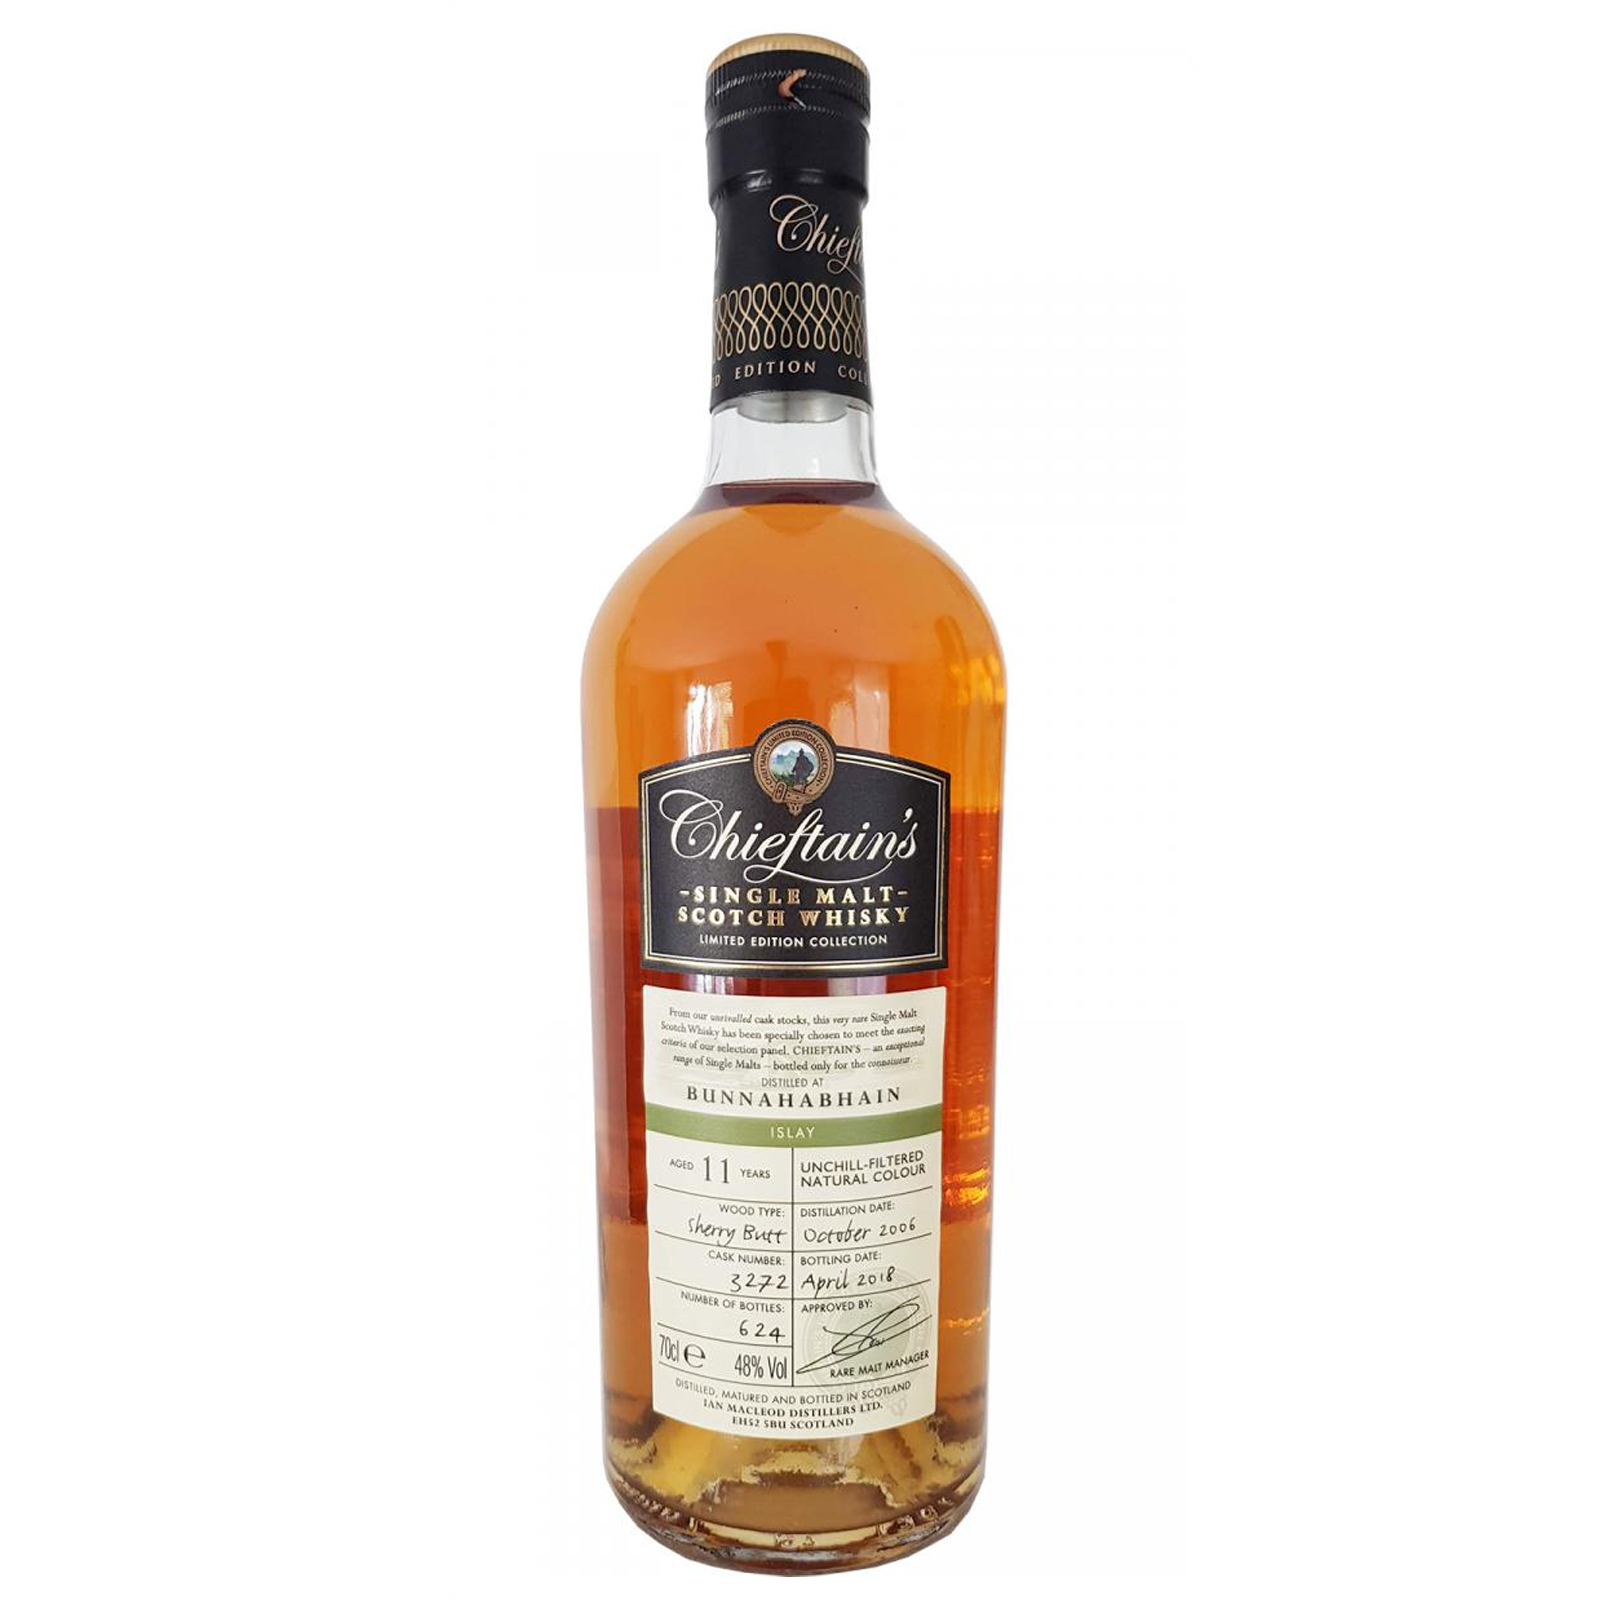 You are currently viewing Bunnahabhain 2004 12 years – cask #3272